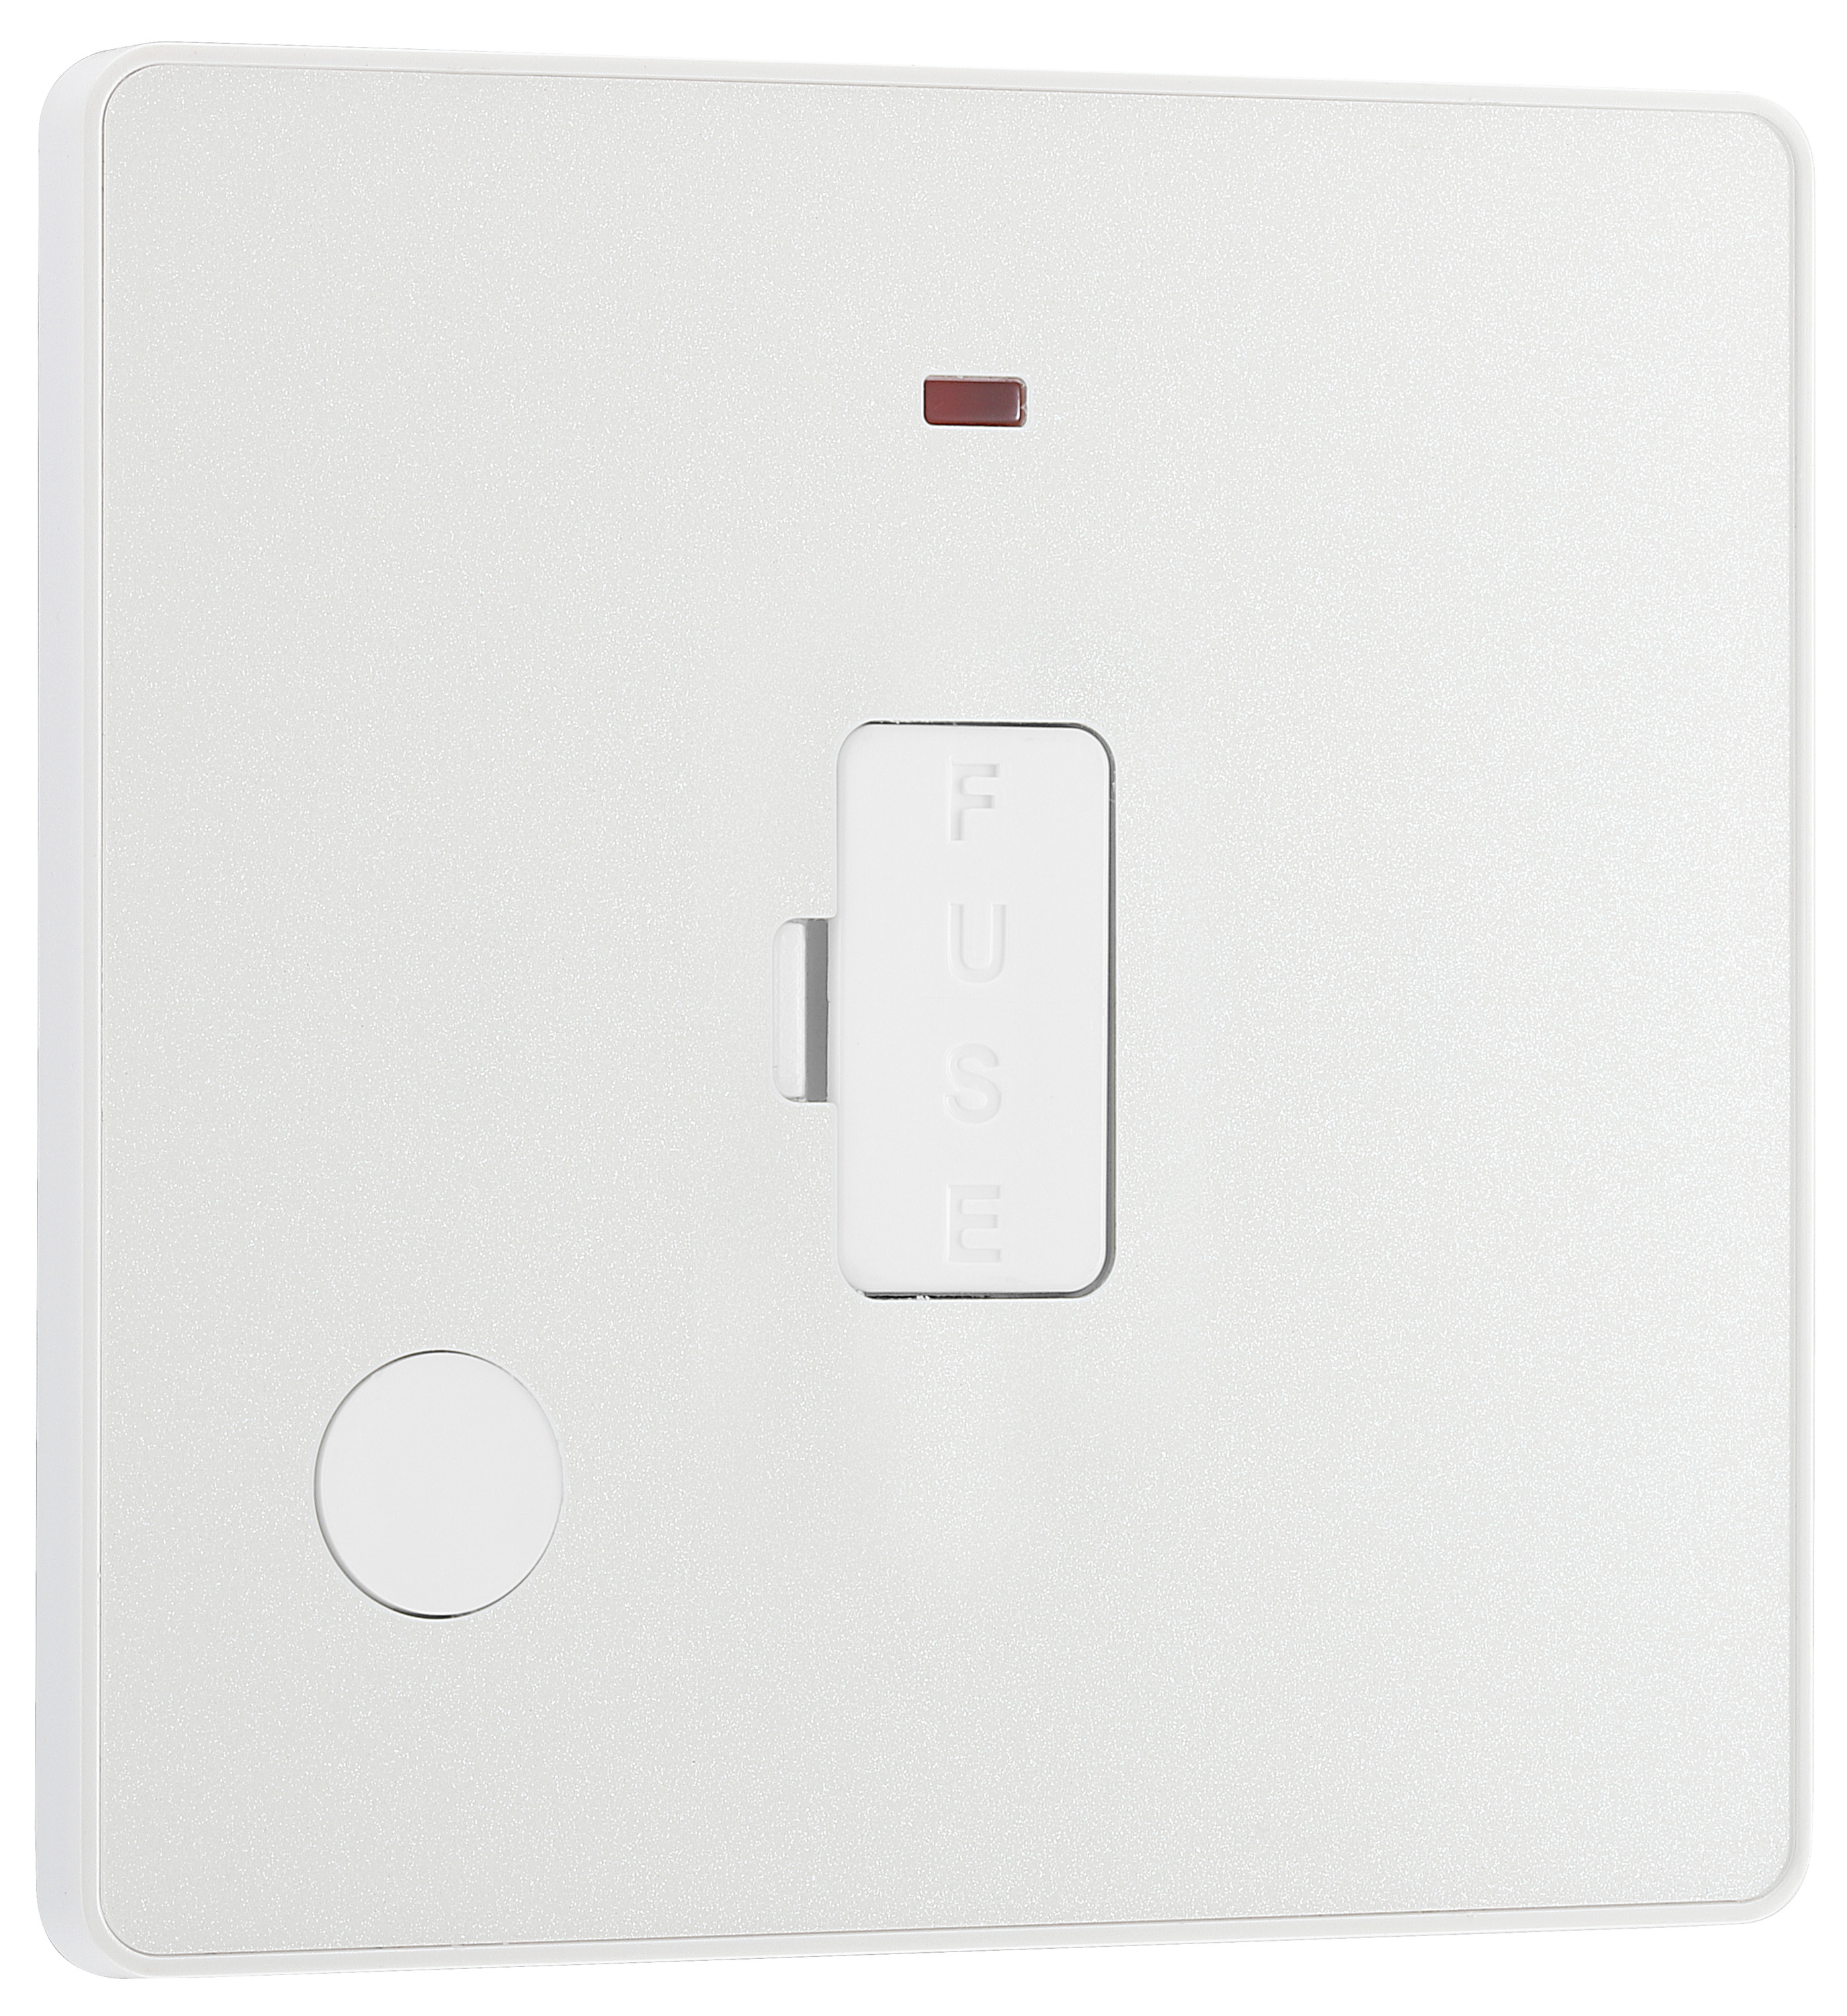 BG Evolve Pearlescent White Unswitched 13A Fused Connection Unit with Power Led Indicator & Flex Outlet